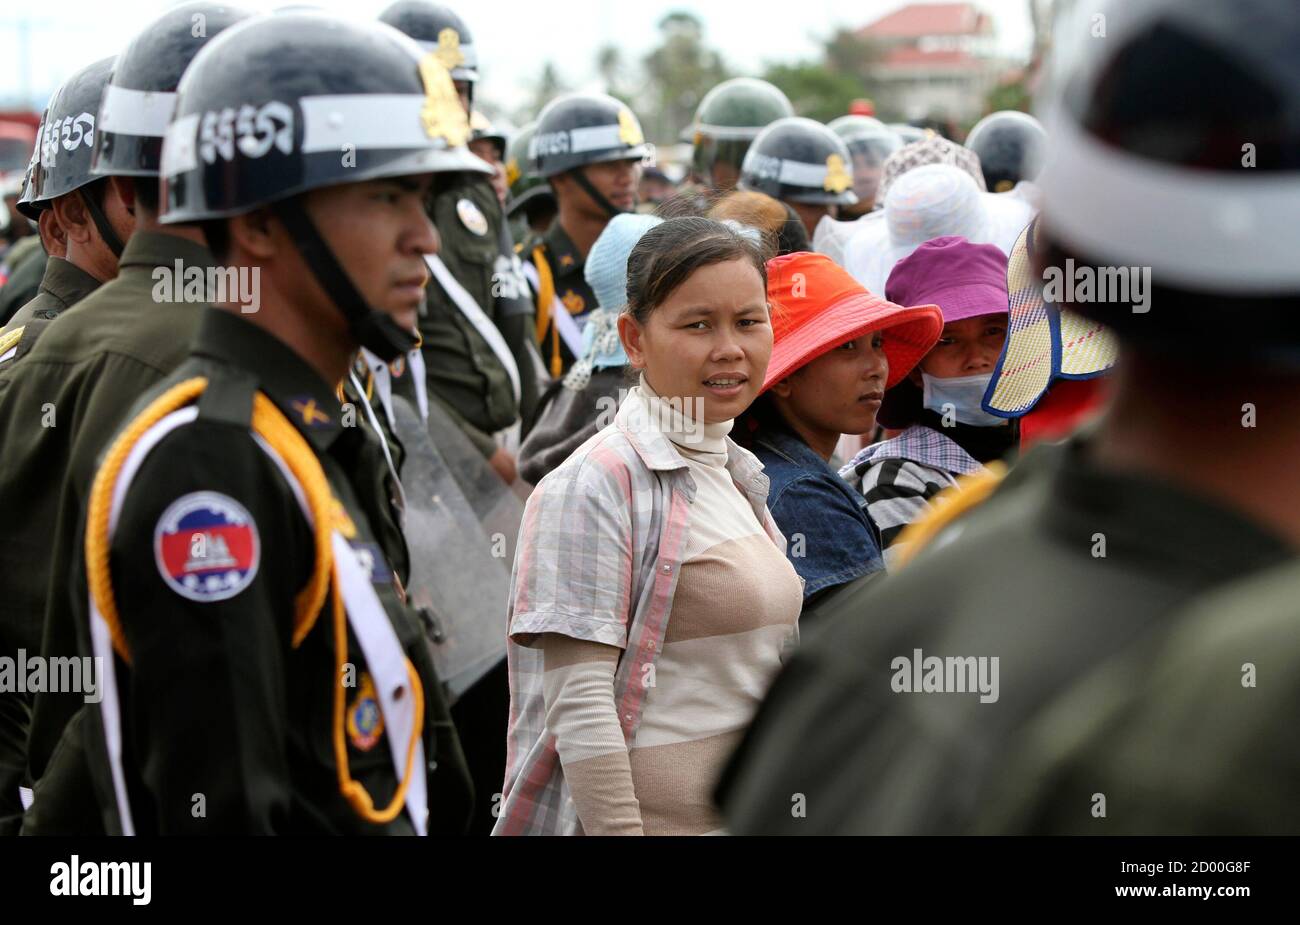 Police block the street as workers march from a garment factory in Kandal province to protest at the Ministry of Labor & Vocational Training in capital Phnom Penh July 5, 2012 .Thousands of workers at the factory, which supplies clothes to U.S. brands Levi Strauss and Old Navy, blocked traffic on a road during their ongoing strike which began in May to demand better pay and more benefits, protesters and police told local media. REUTERS/Samrang Pring (CAMBODIA - Tags: BUSINESS EMPLOYMENT CIVIL UNREST) Stock Photo